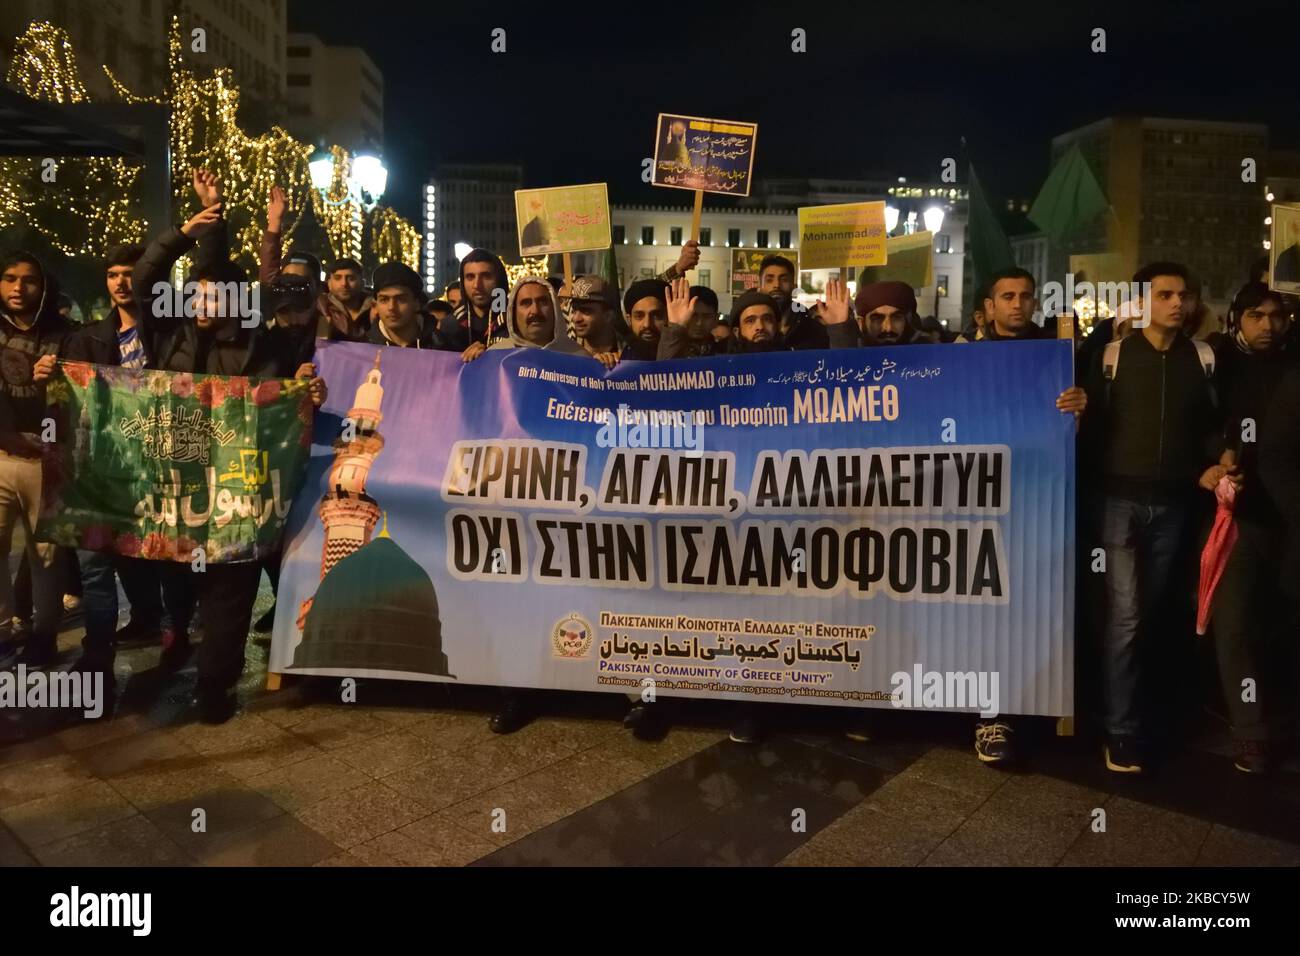 Members of the Pakistani Community of Greece demonstrate on 14 December 2019, in central Athens, Greece, against Islamophobia following the recent public insults of a man against Islam. (Photo by Nicolas Koutsokostas/NurPhoto) Stock Photo